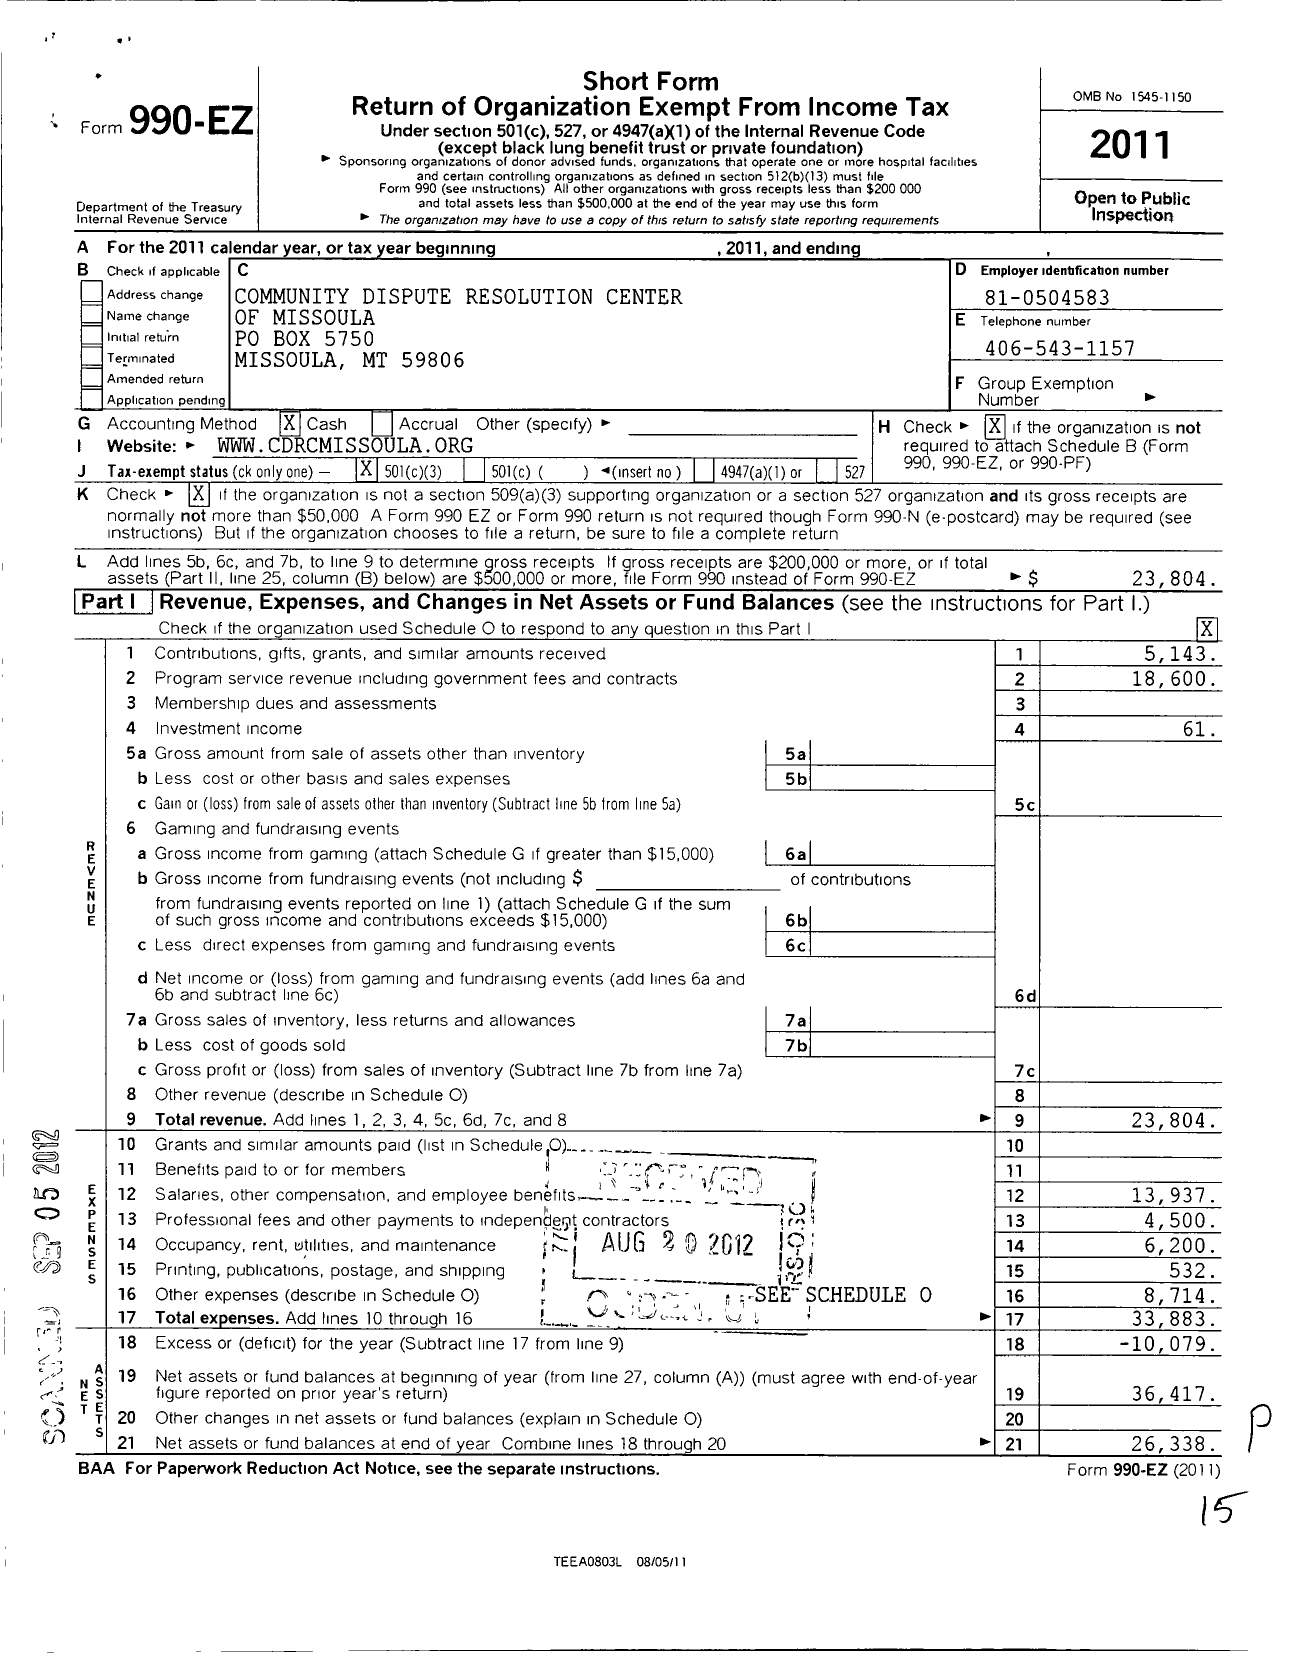 Image of first page of 2011 Form 990EZ for Community Dispute Resolution Center of Missoula